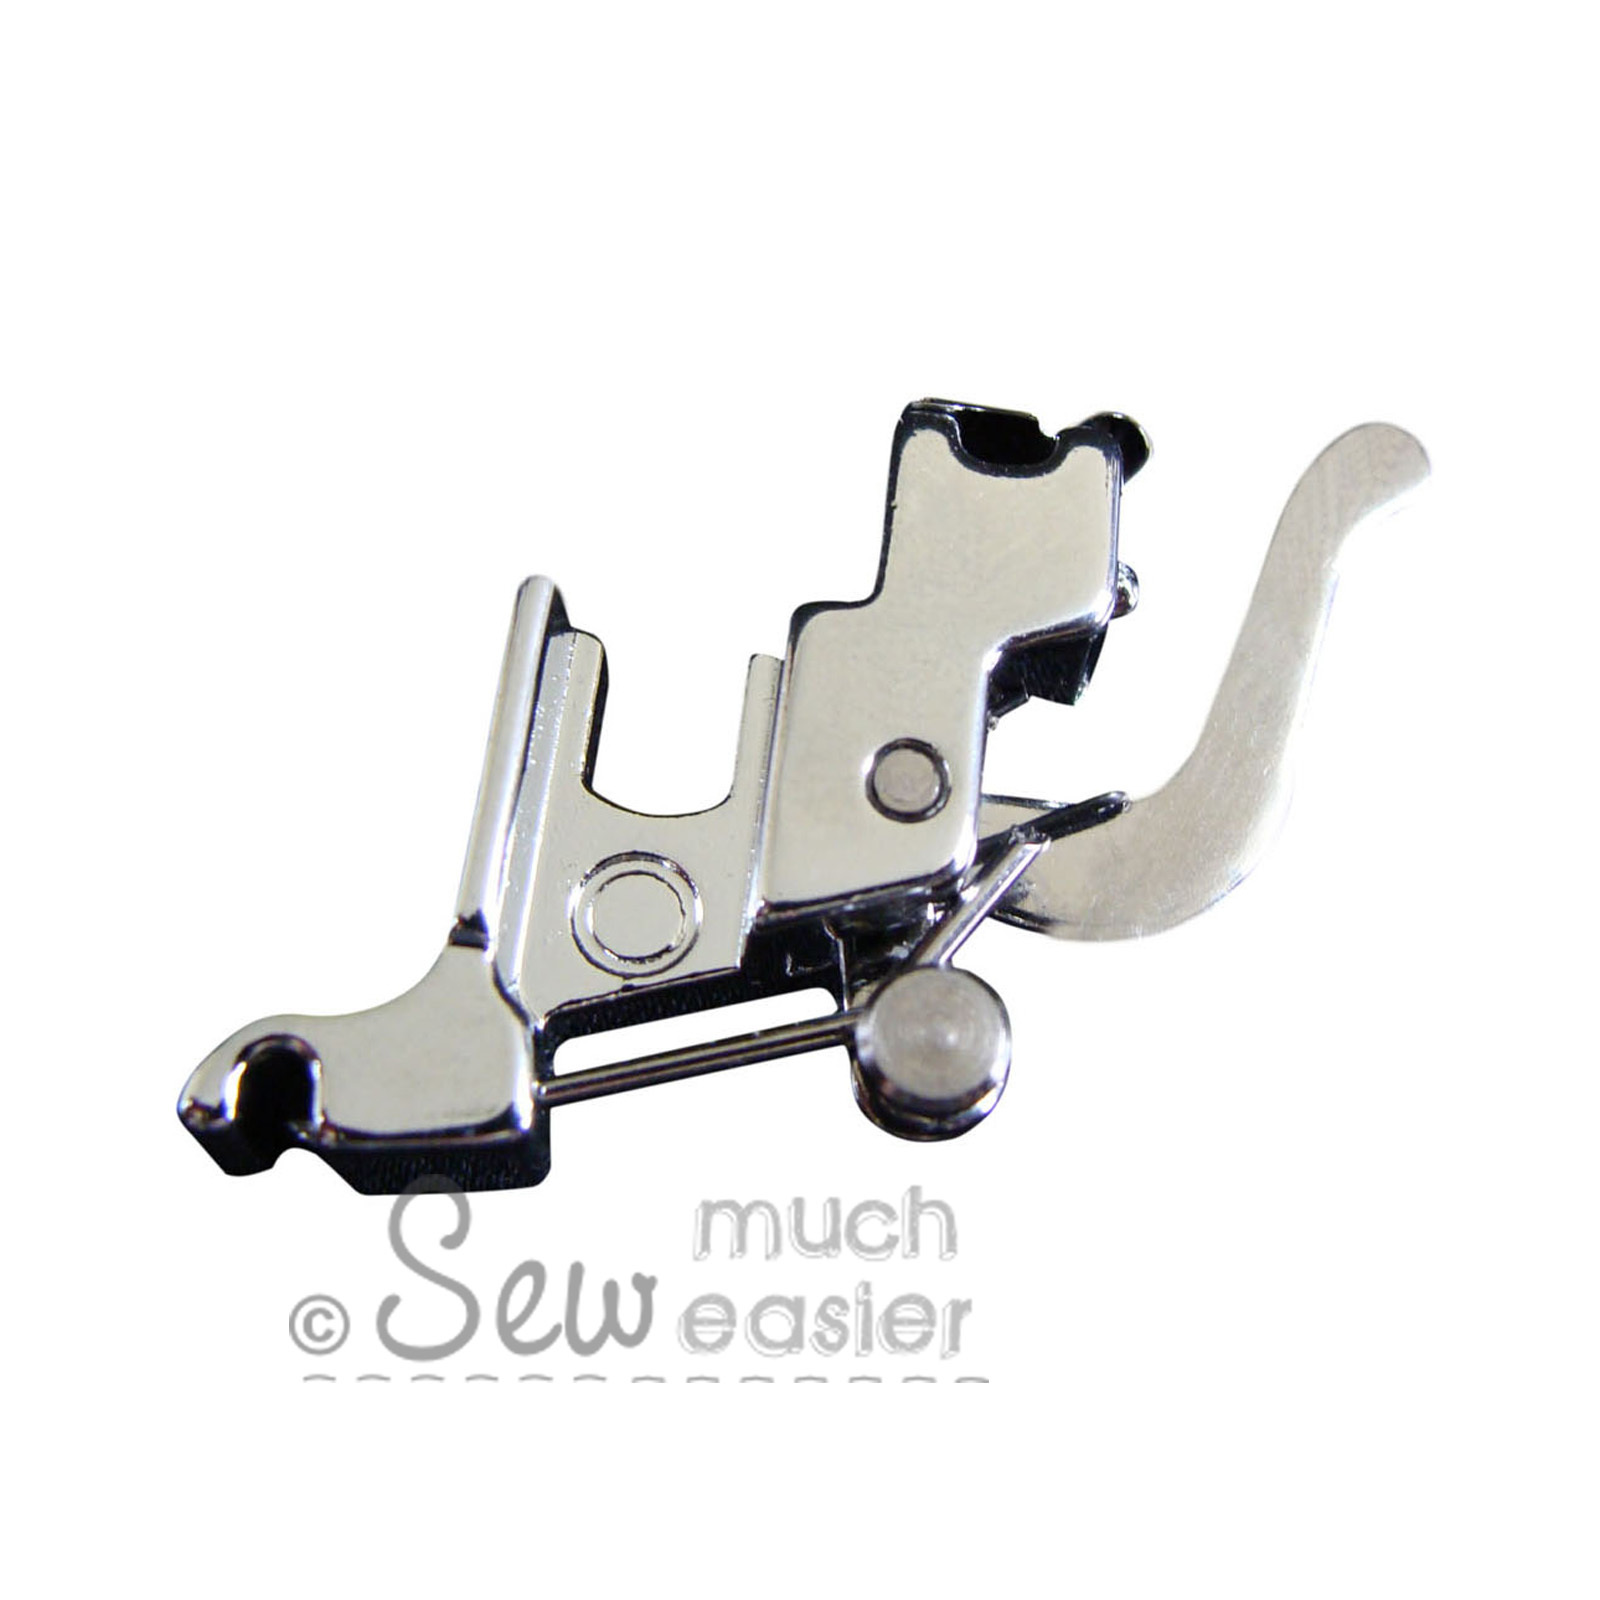 Parts Foot Low Shank Metal Holder Presser Feet Adapter Snap On Sewing Machine*